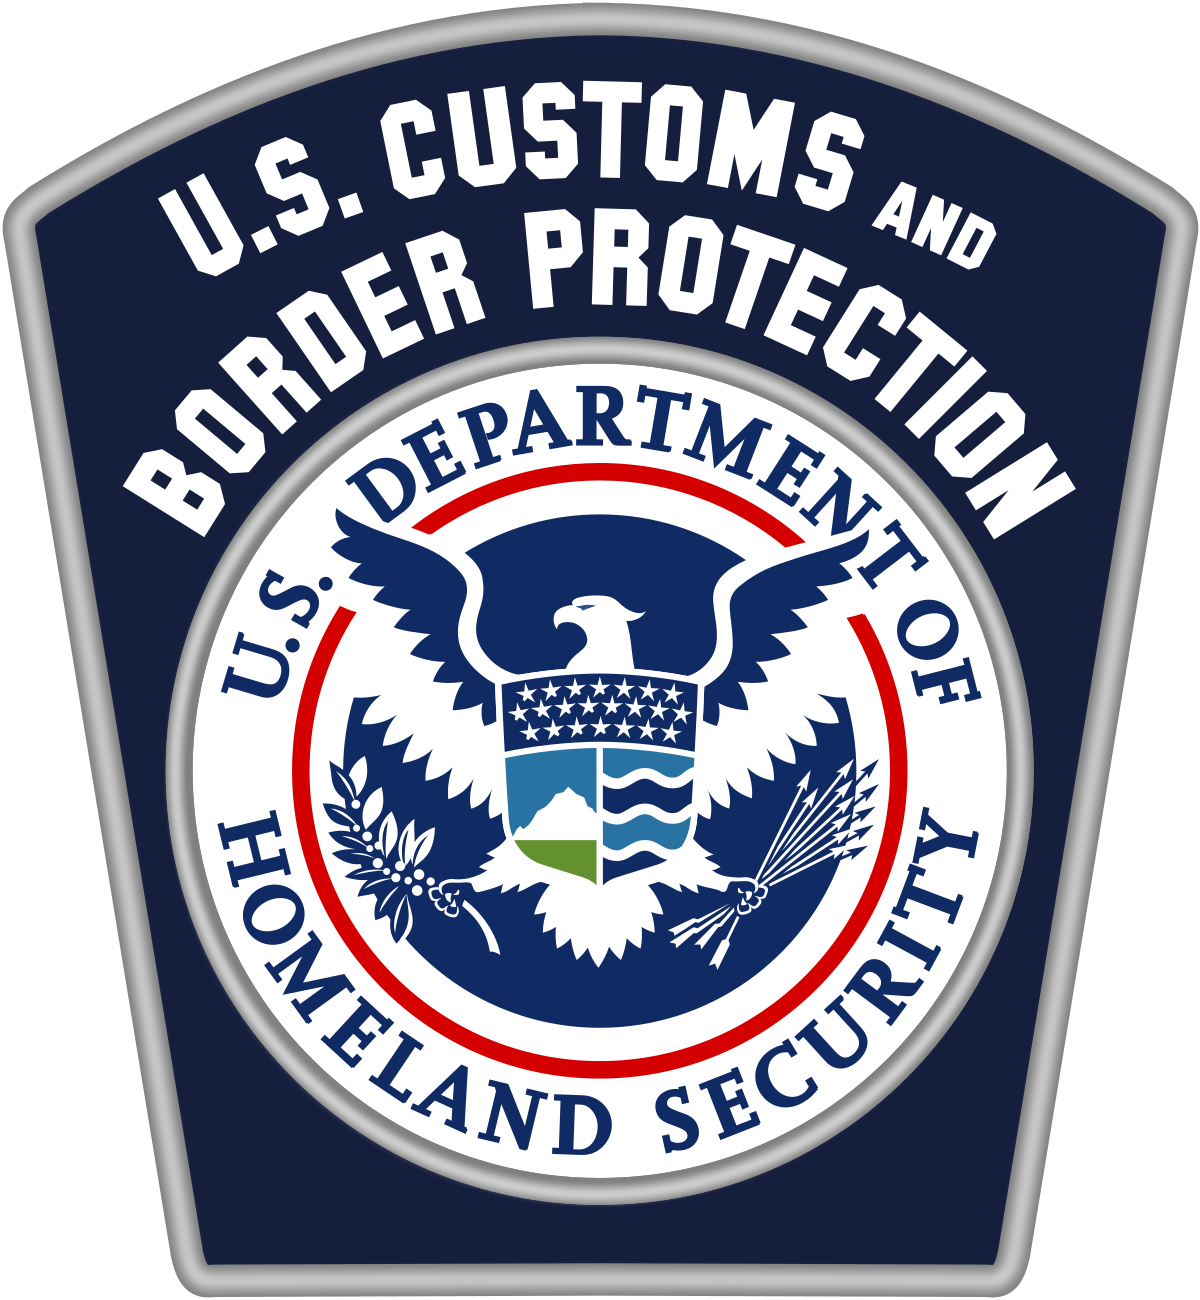 U.S._Customs_and_Border_Protection.svg